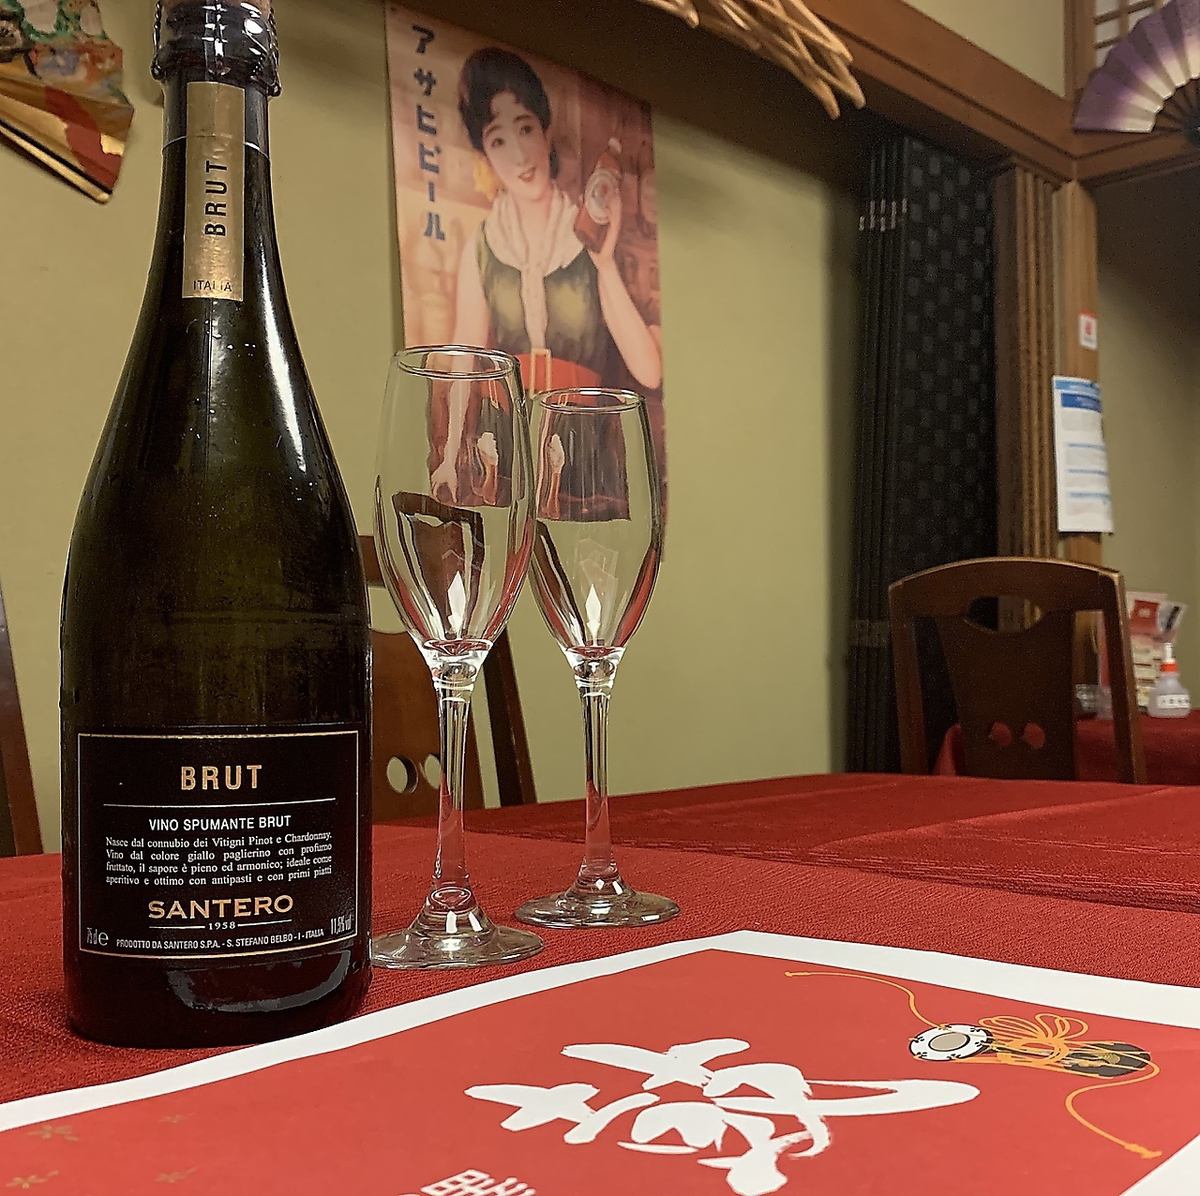 For celebrations ◎ Champagne gifts that go well with Japanese food for birthdays ♪